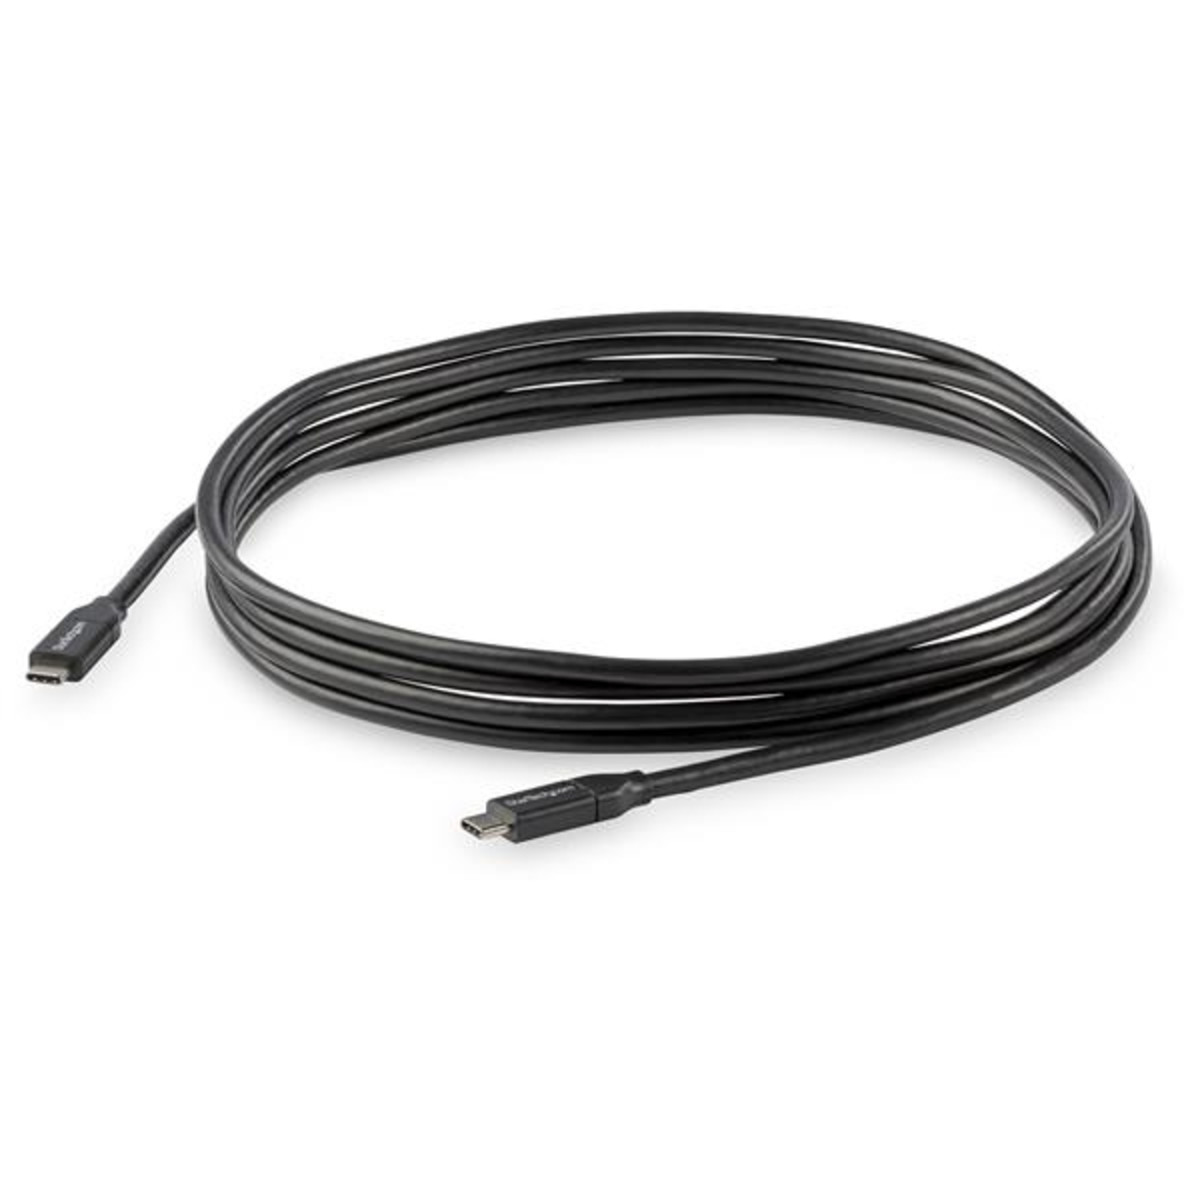 Cable USB-C w/ 5A PD - USB 2.0 - 3m 10ft